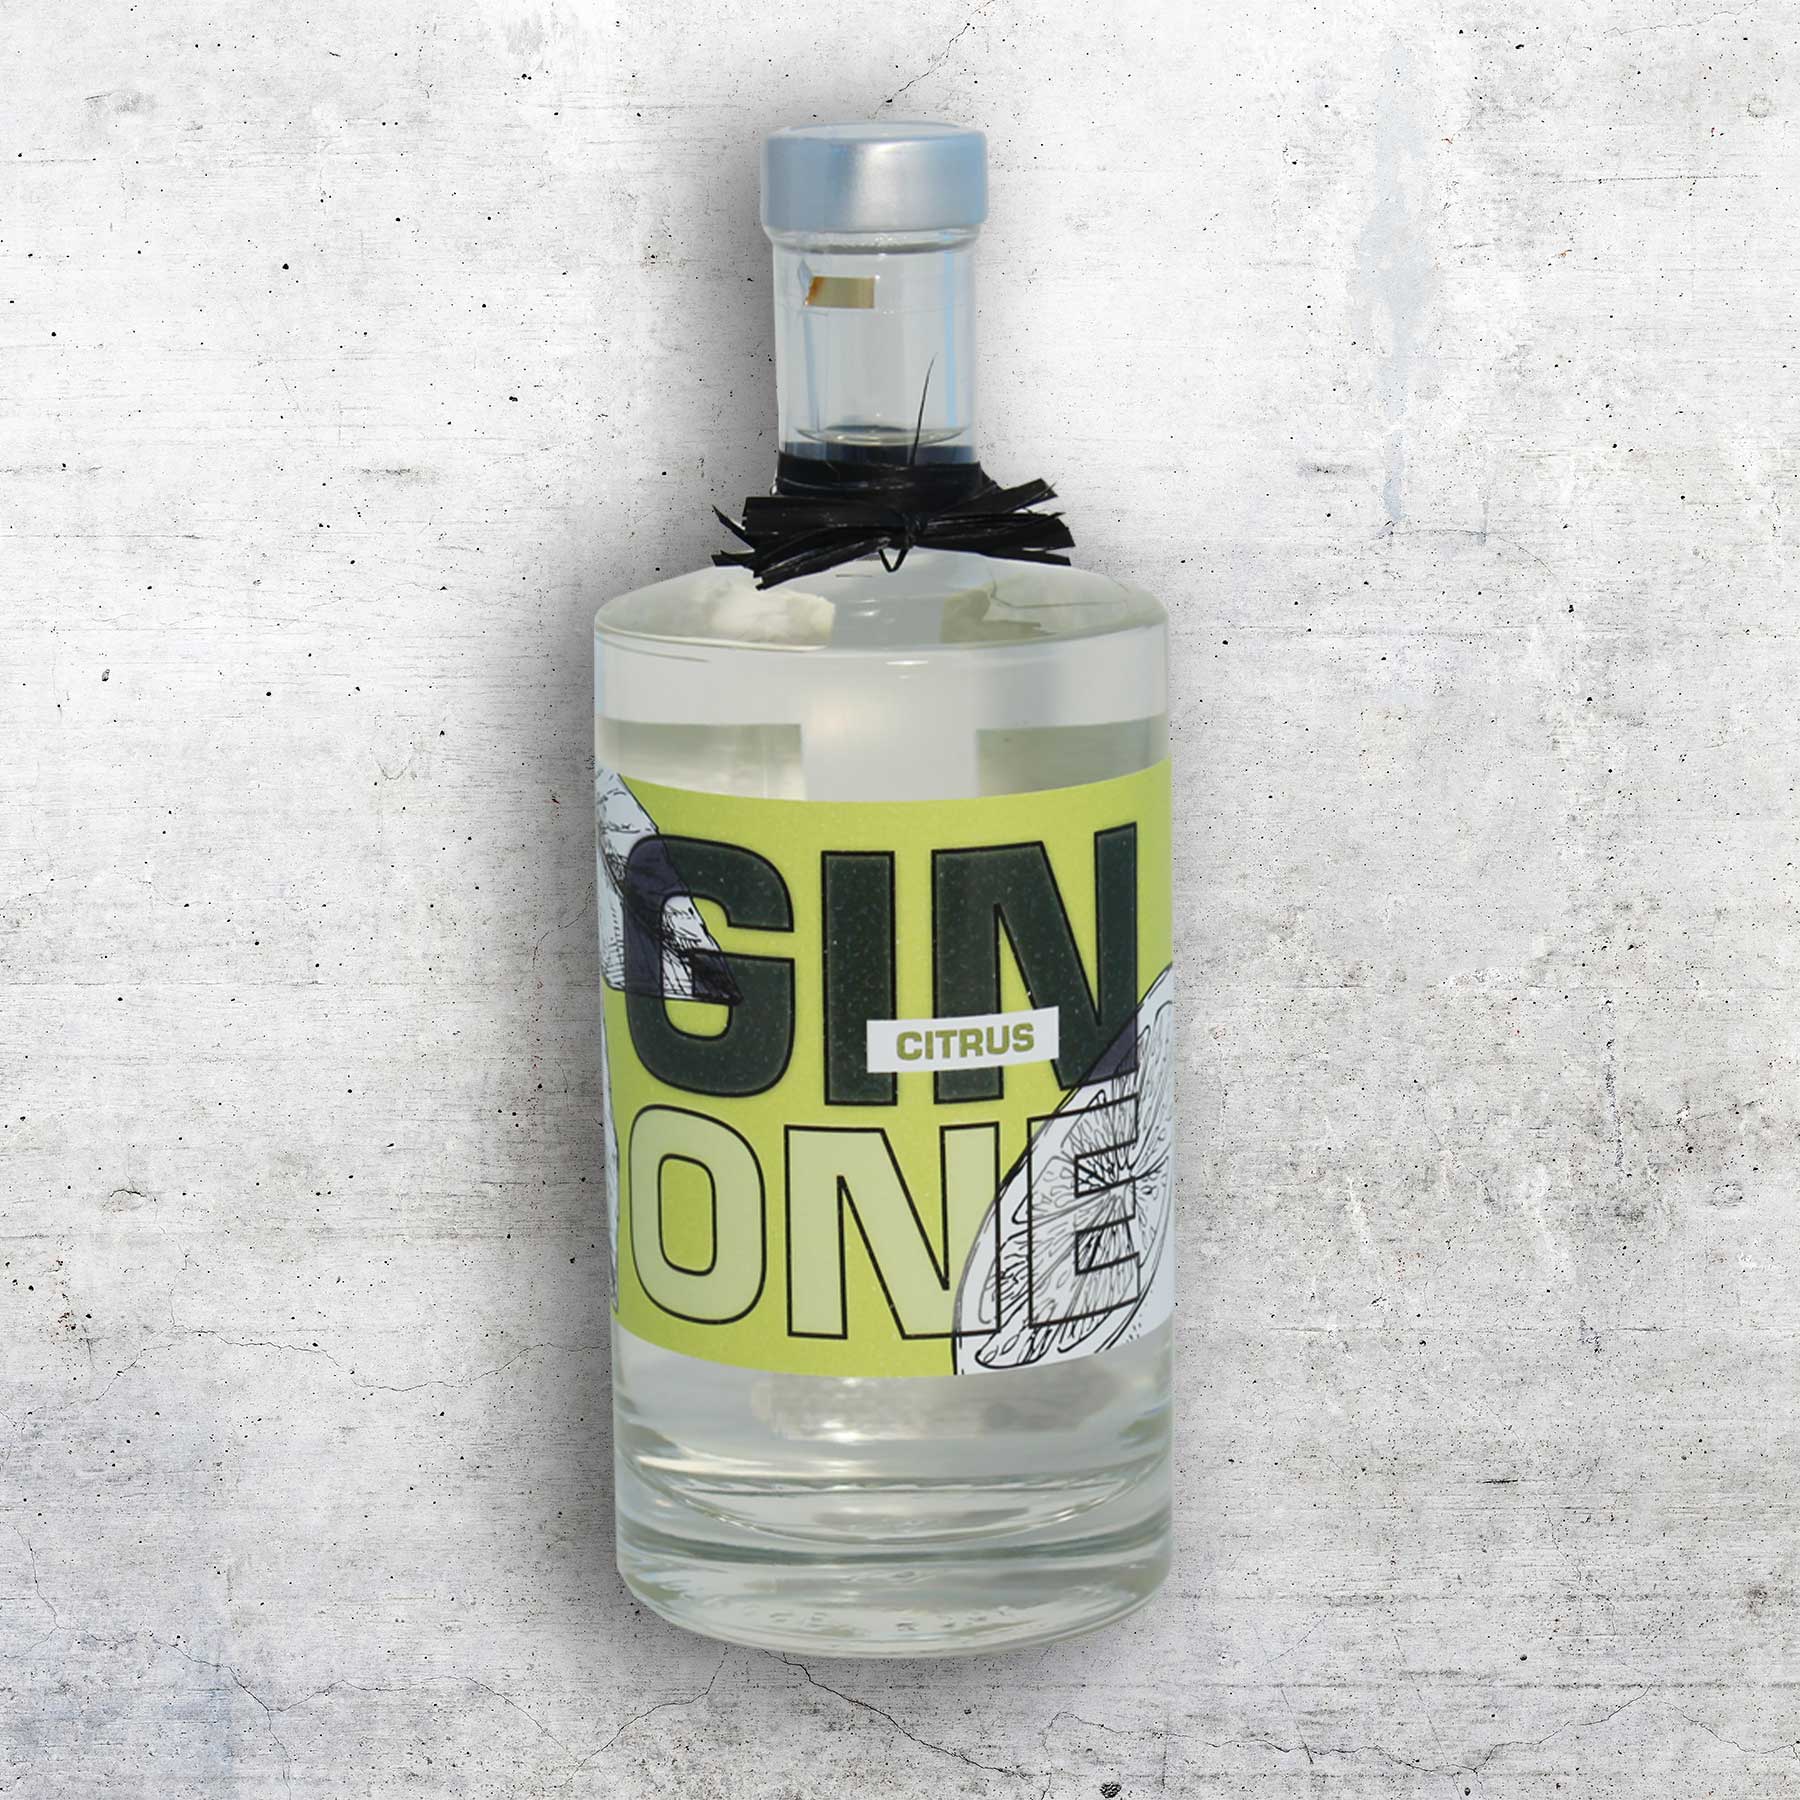 Gin ONE Citrus